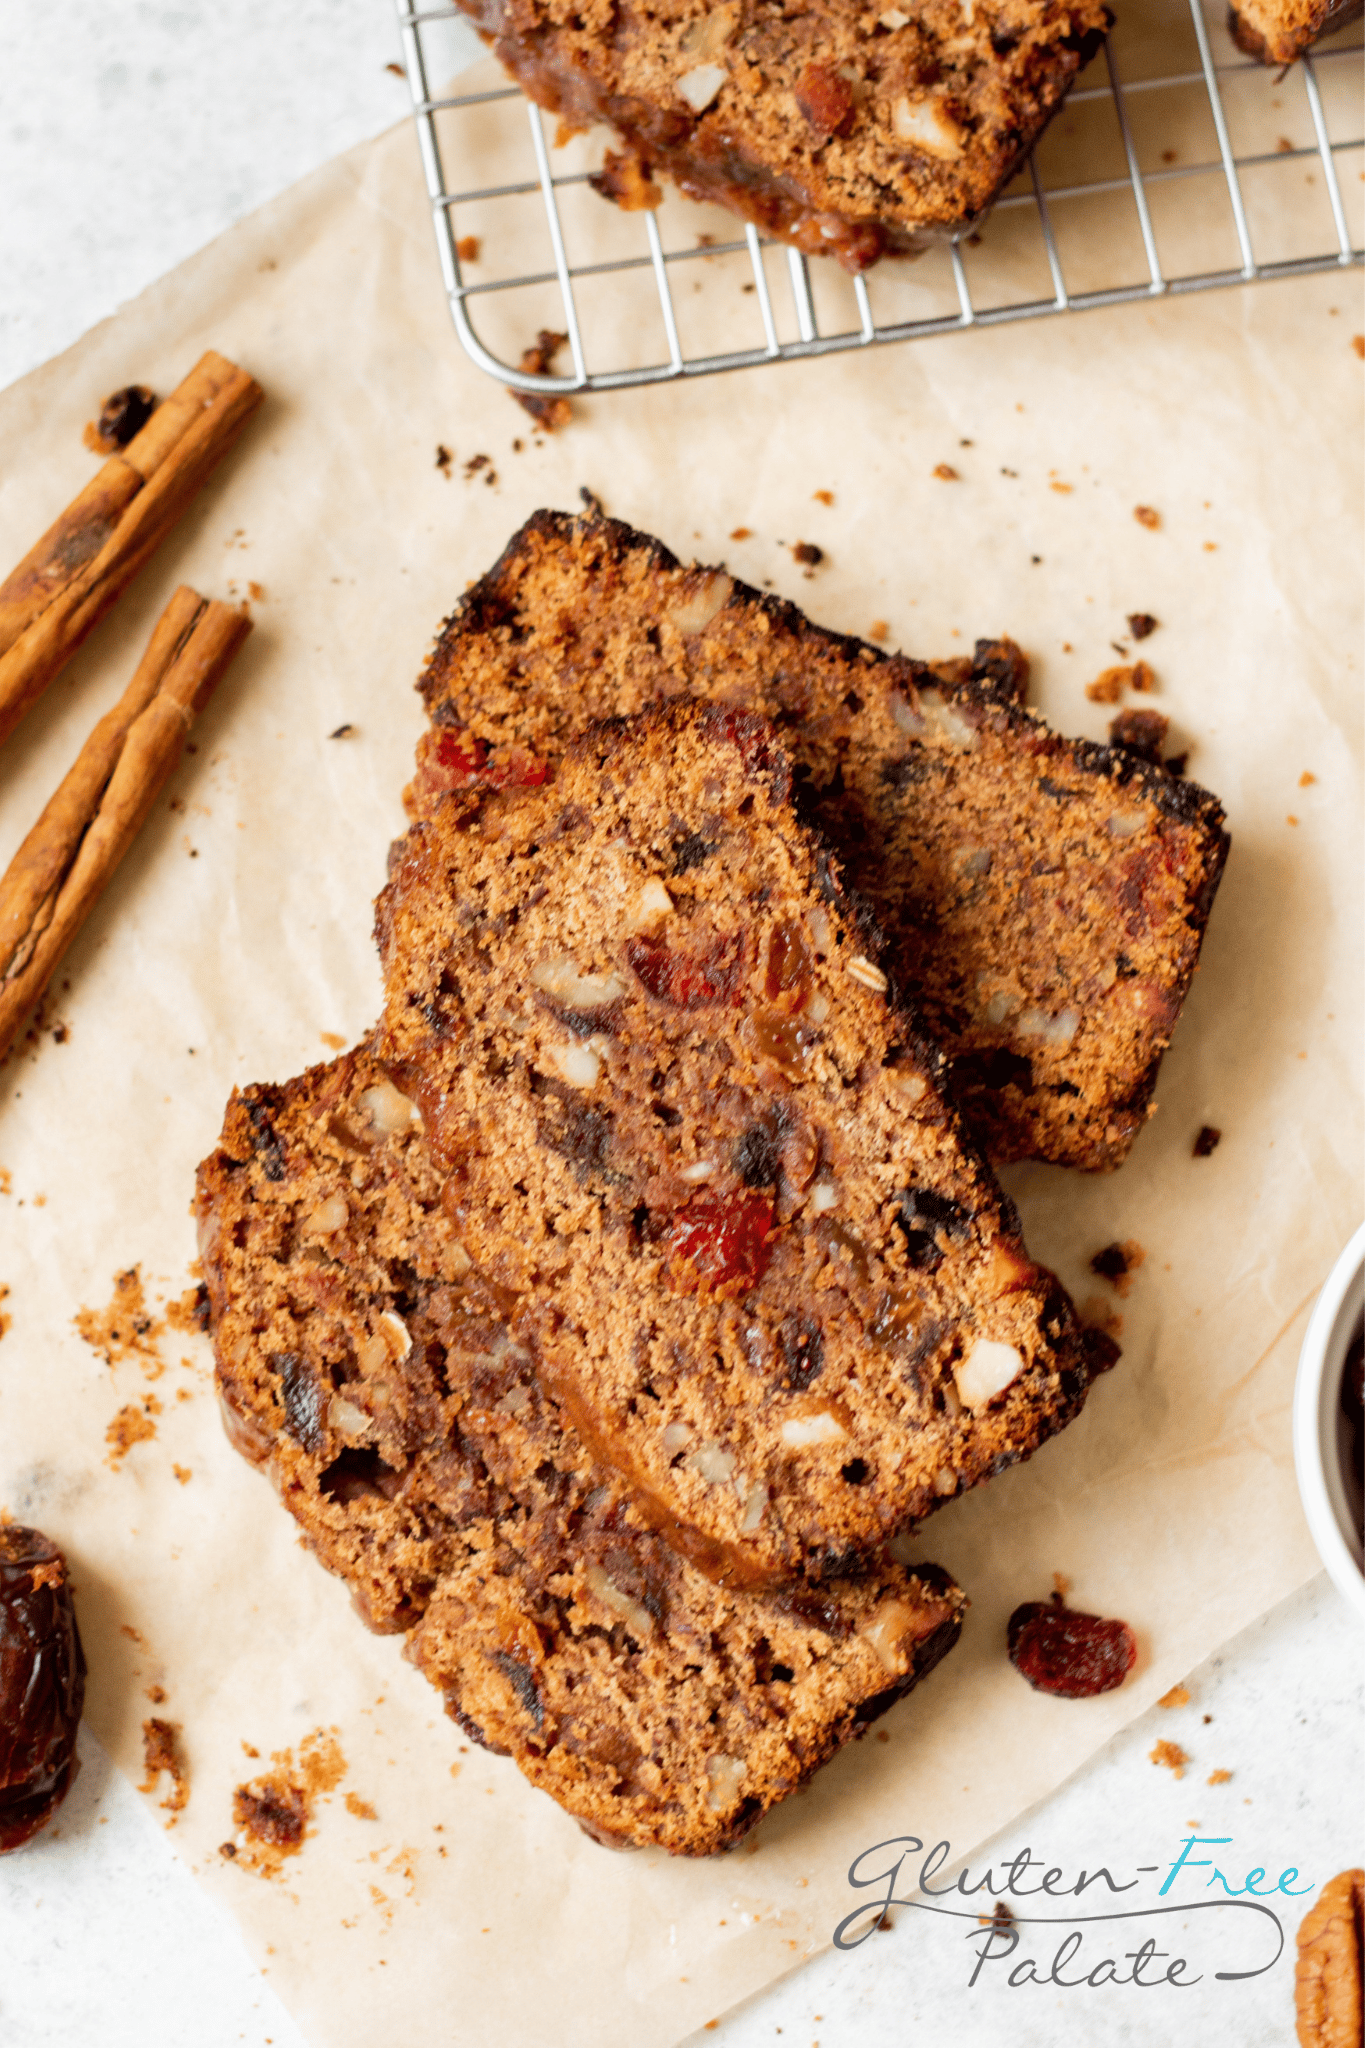 slices of fruit cake arranged on a cutting board, cinnamon sticks and dried cranberries are strewn around. 